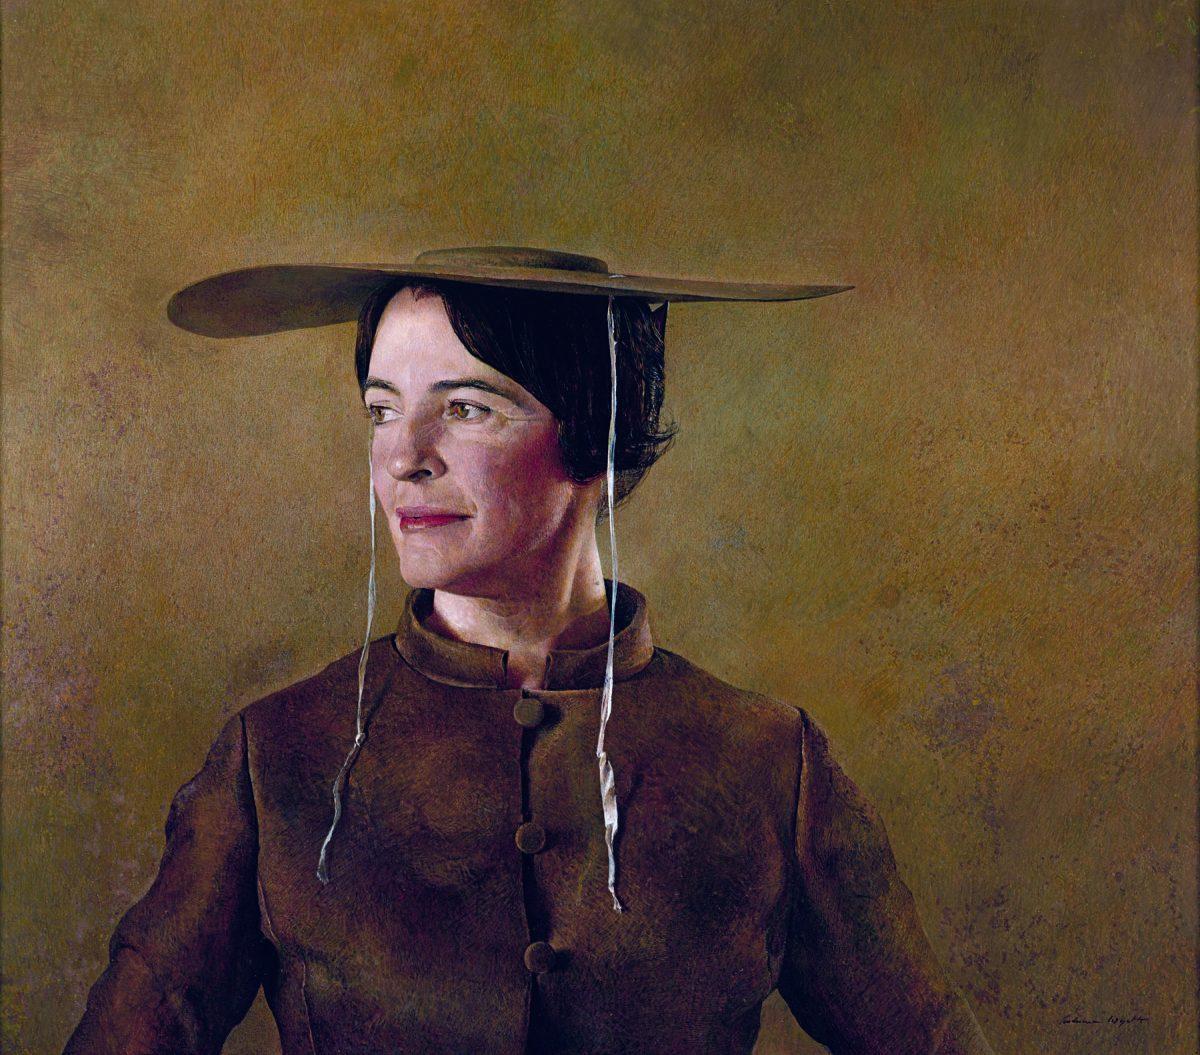 “Maga’s Daughter,” 1966, by Andrew Wyeth (a painting of his wife, Betsy Wyeth). Tempera <span class="s1">on hardboard panel, 26 </span><span class="s2">1⁄2 </span><span class="s1">inches by 30 </span><span class="s2">1⁄4 </span><span class="s1">inches. </span>The Andrew and Betsy Wyeth Collection. [Andrew Wyeth/Artists Rights Society (ARS)]